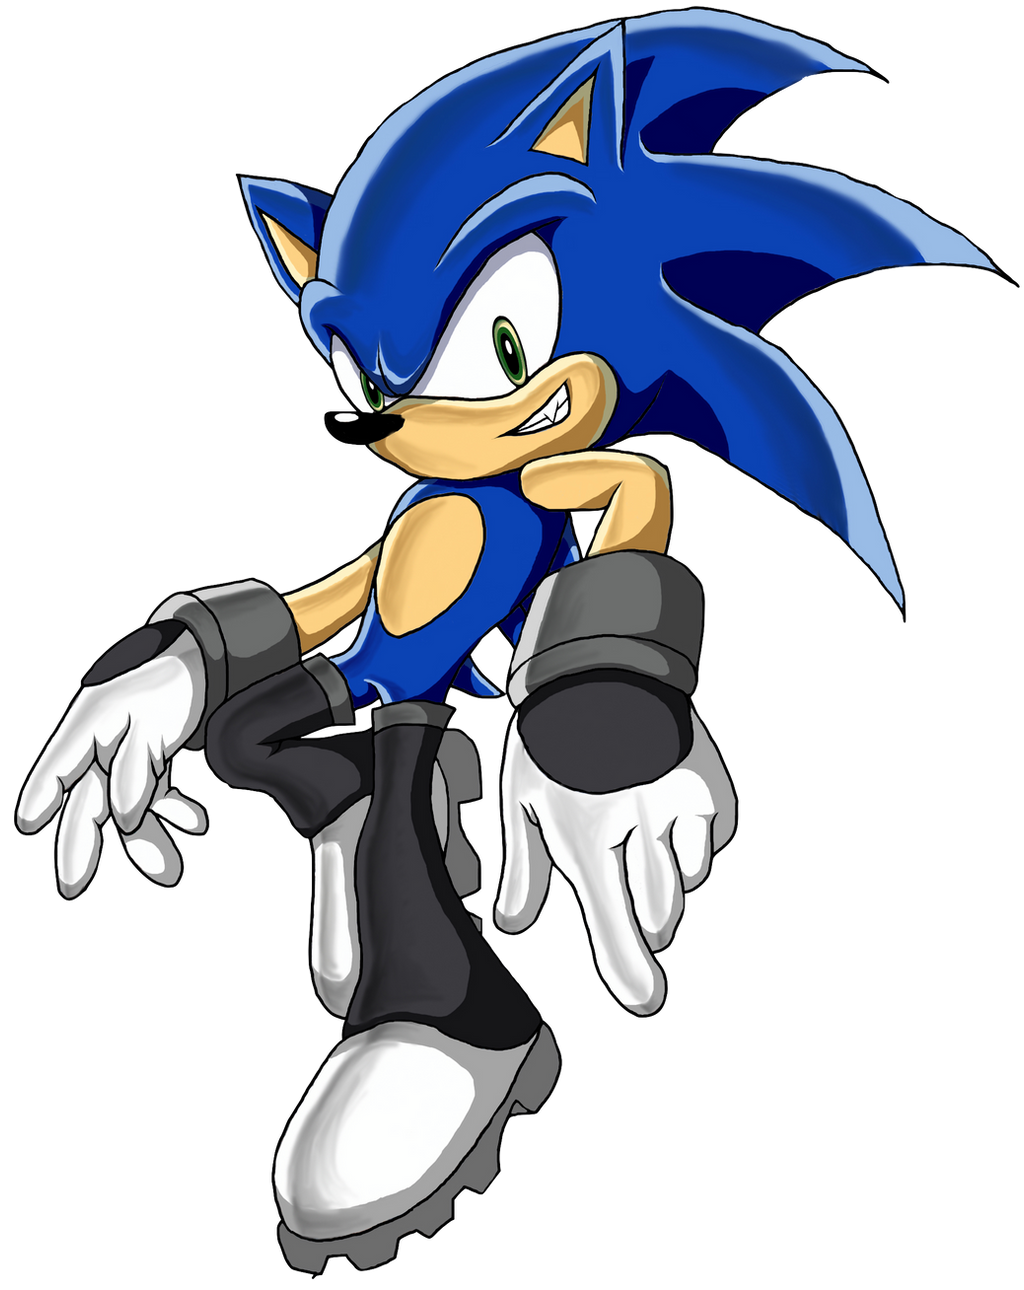 Neo Sonic Black (Ring of Chaos) by Sangata099 on DeviantArt